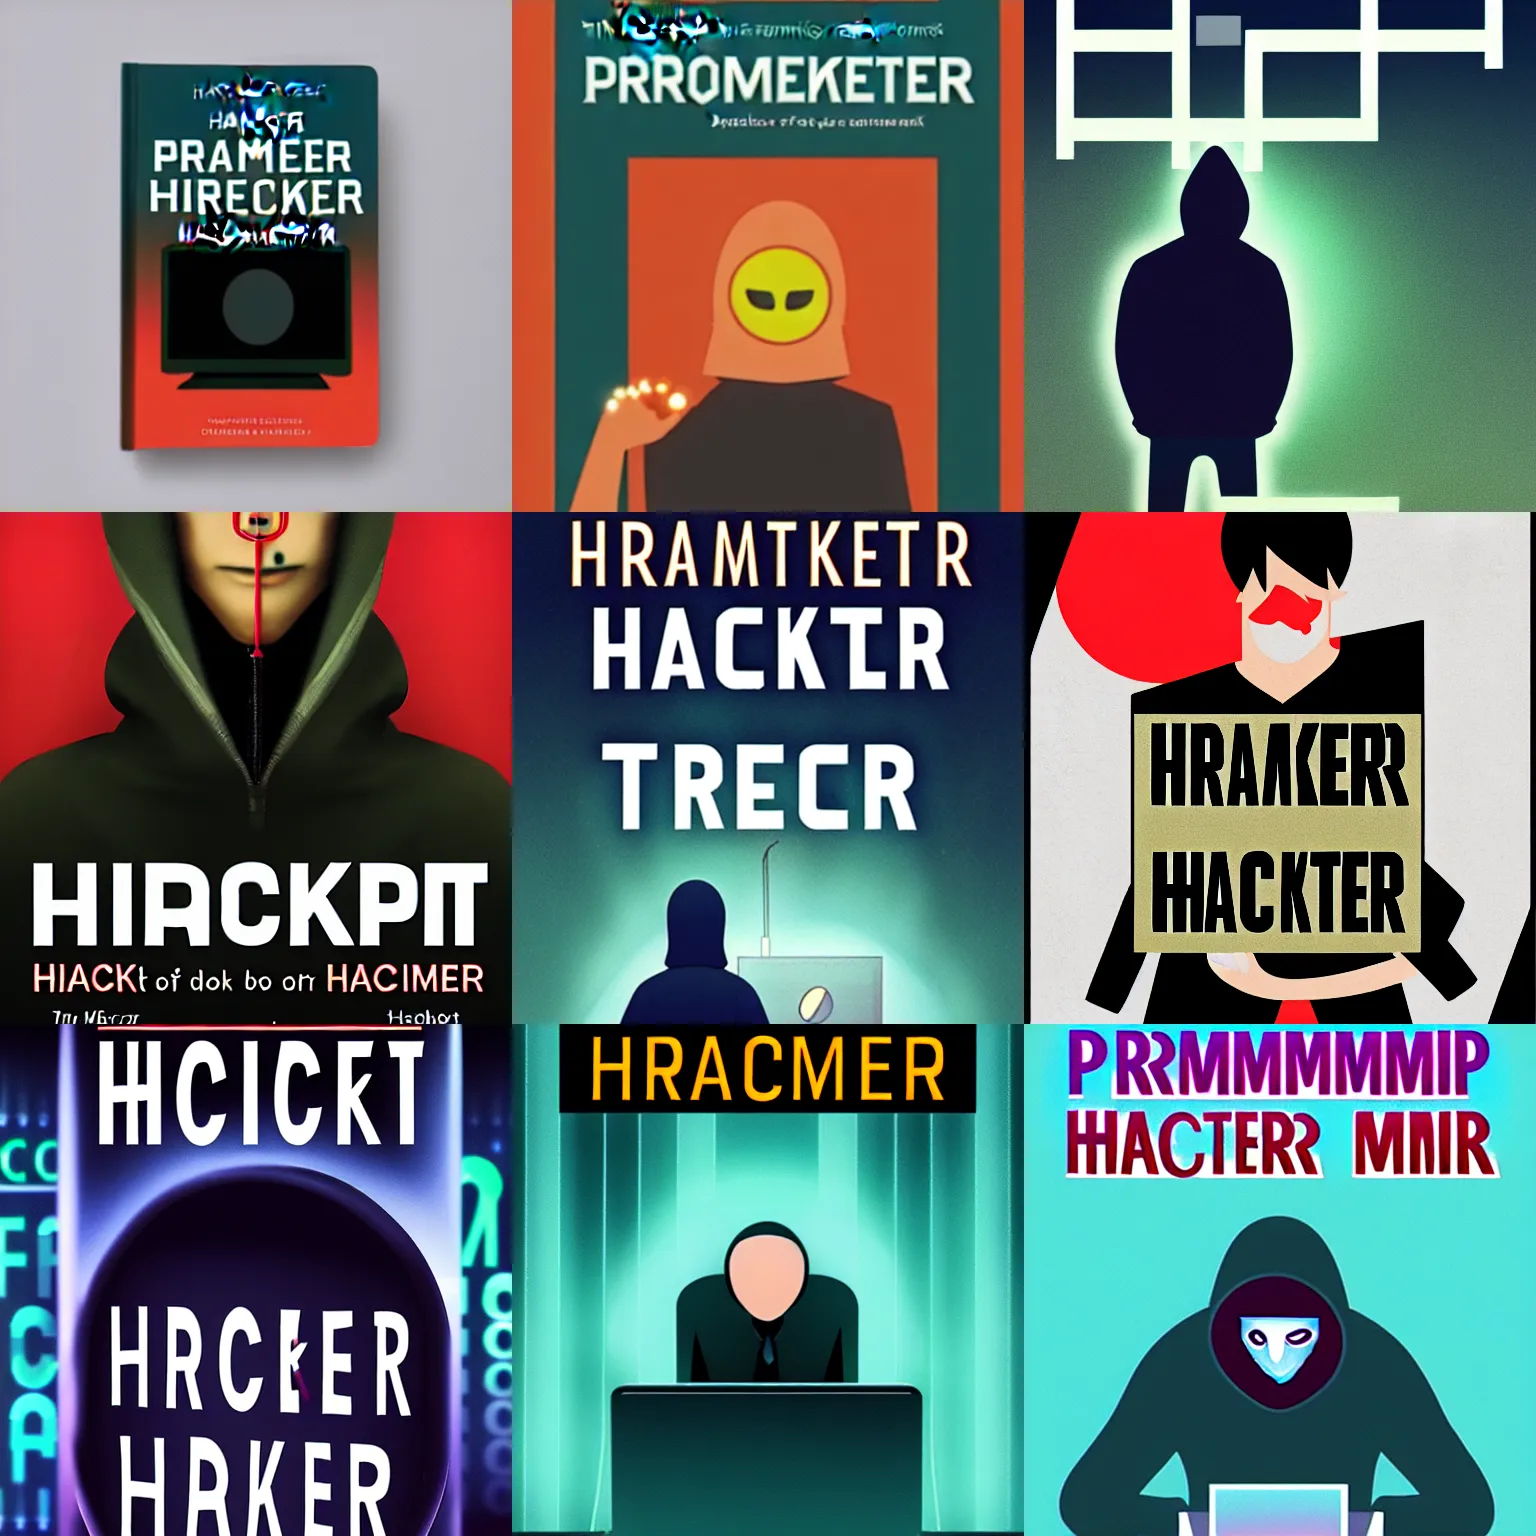 Image similar to ' prompt hacker ', book cover